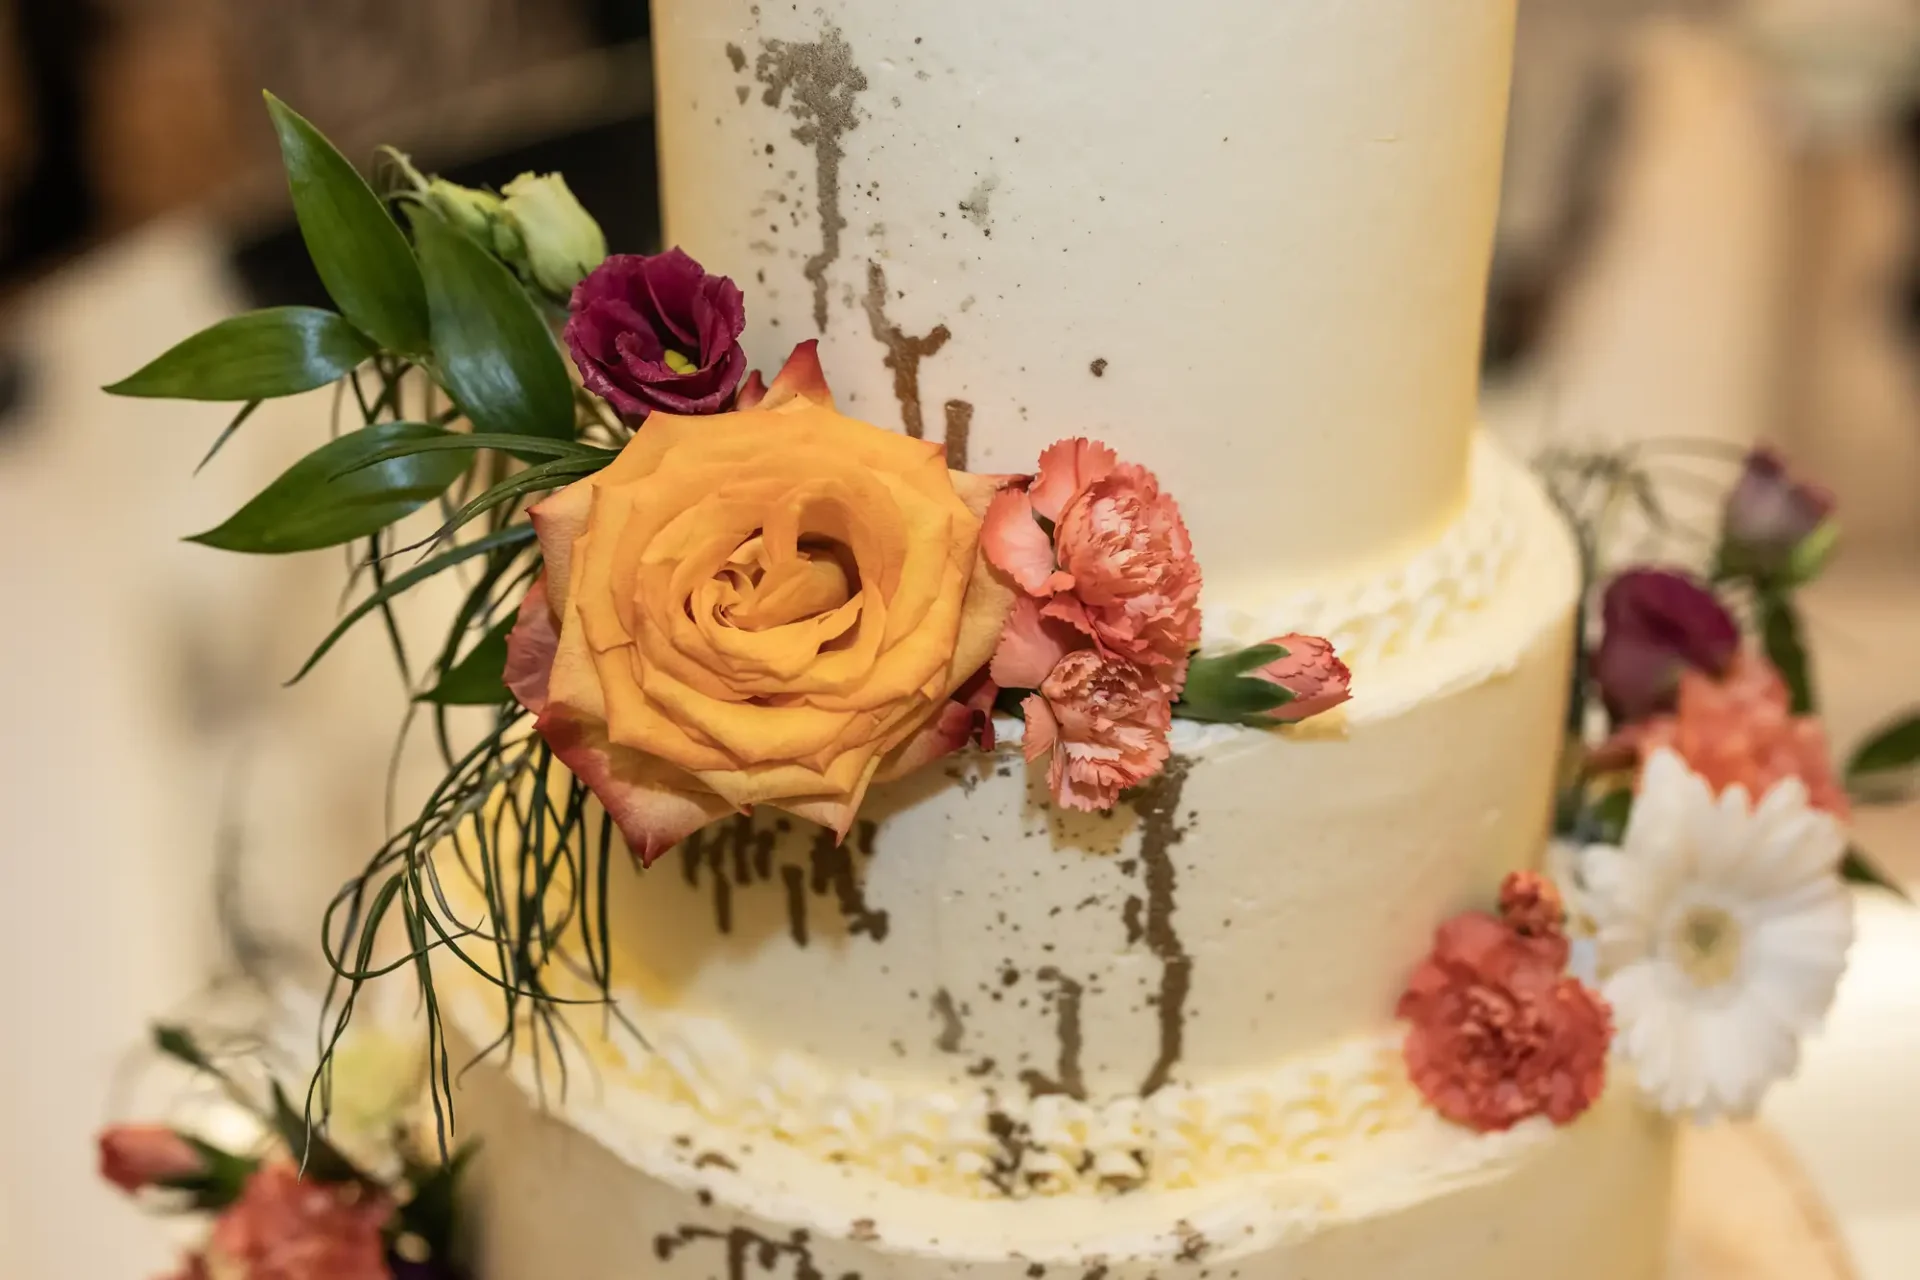 Close-up of a three-tiered white wedding cake adorned with fresh flowers, including an orange rose and pink carnations, with light frosting drips.